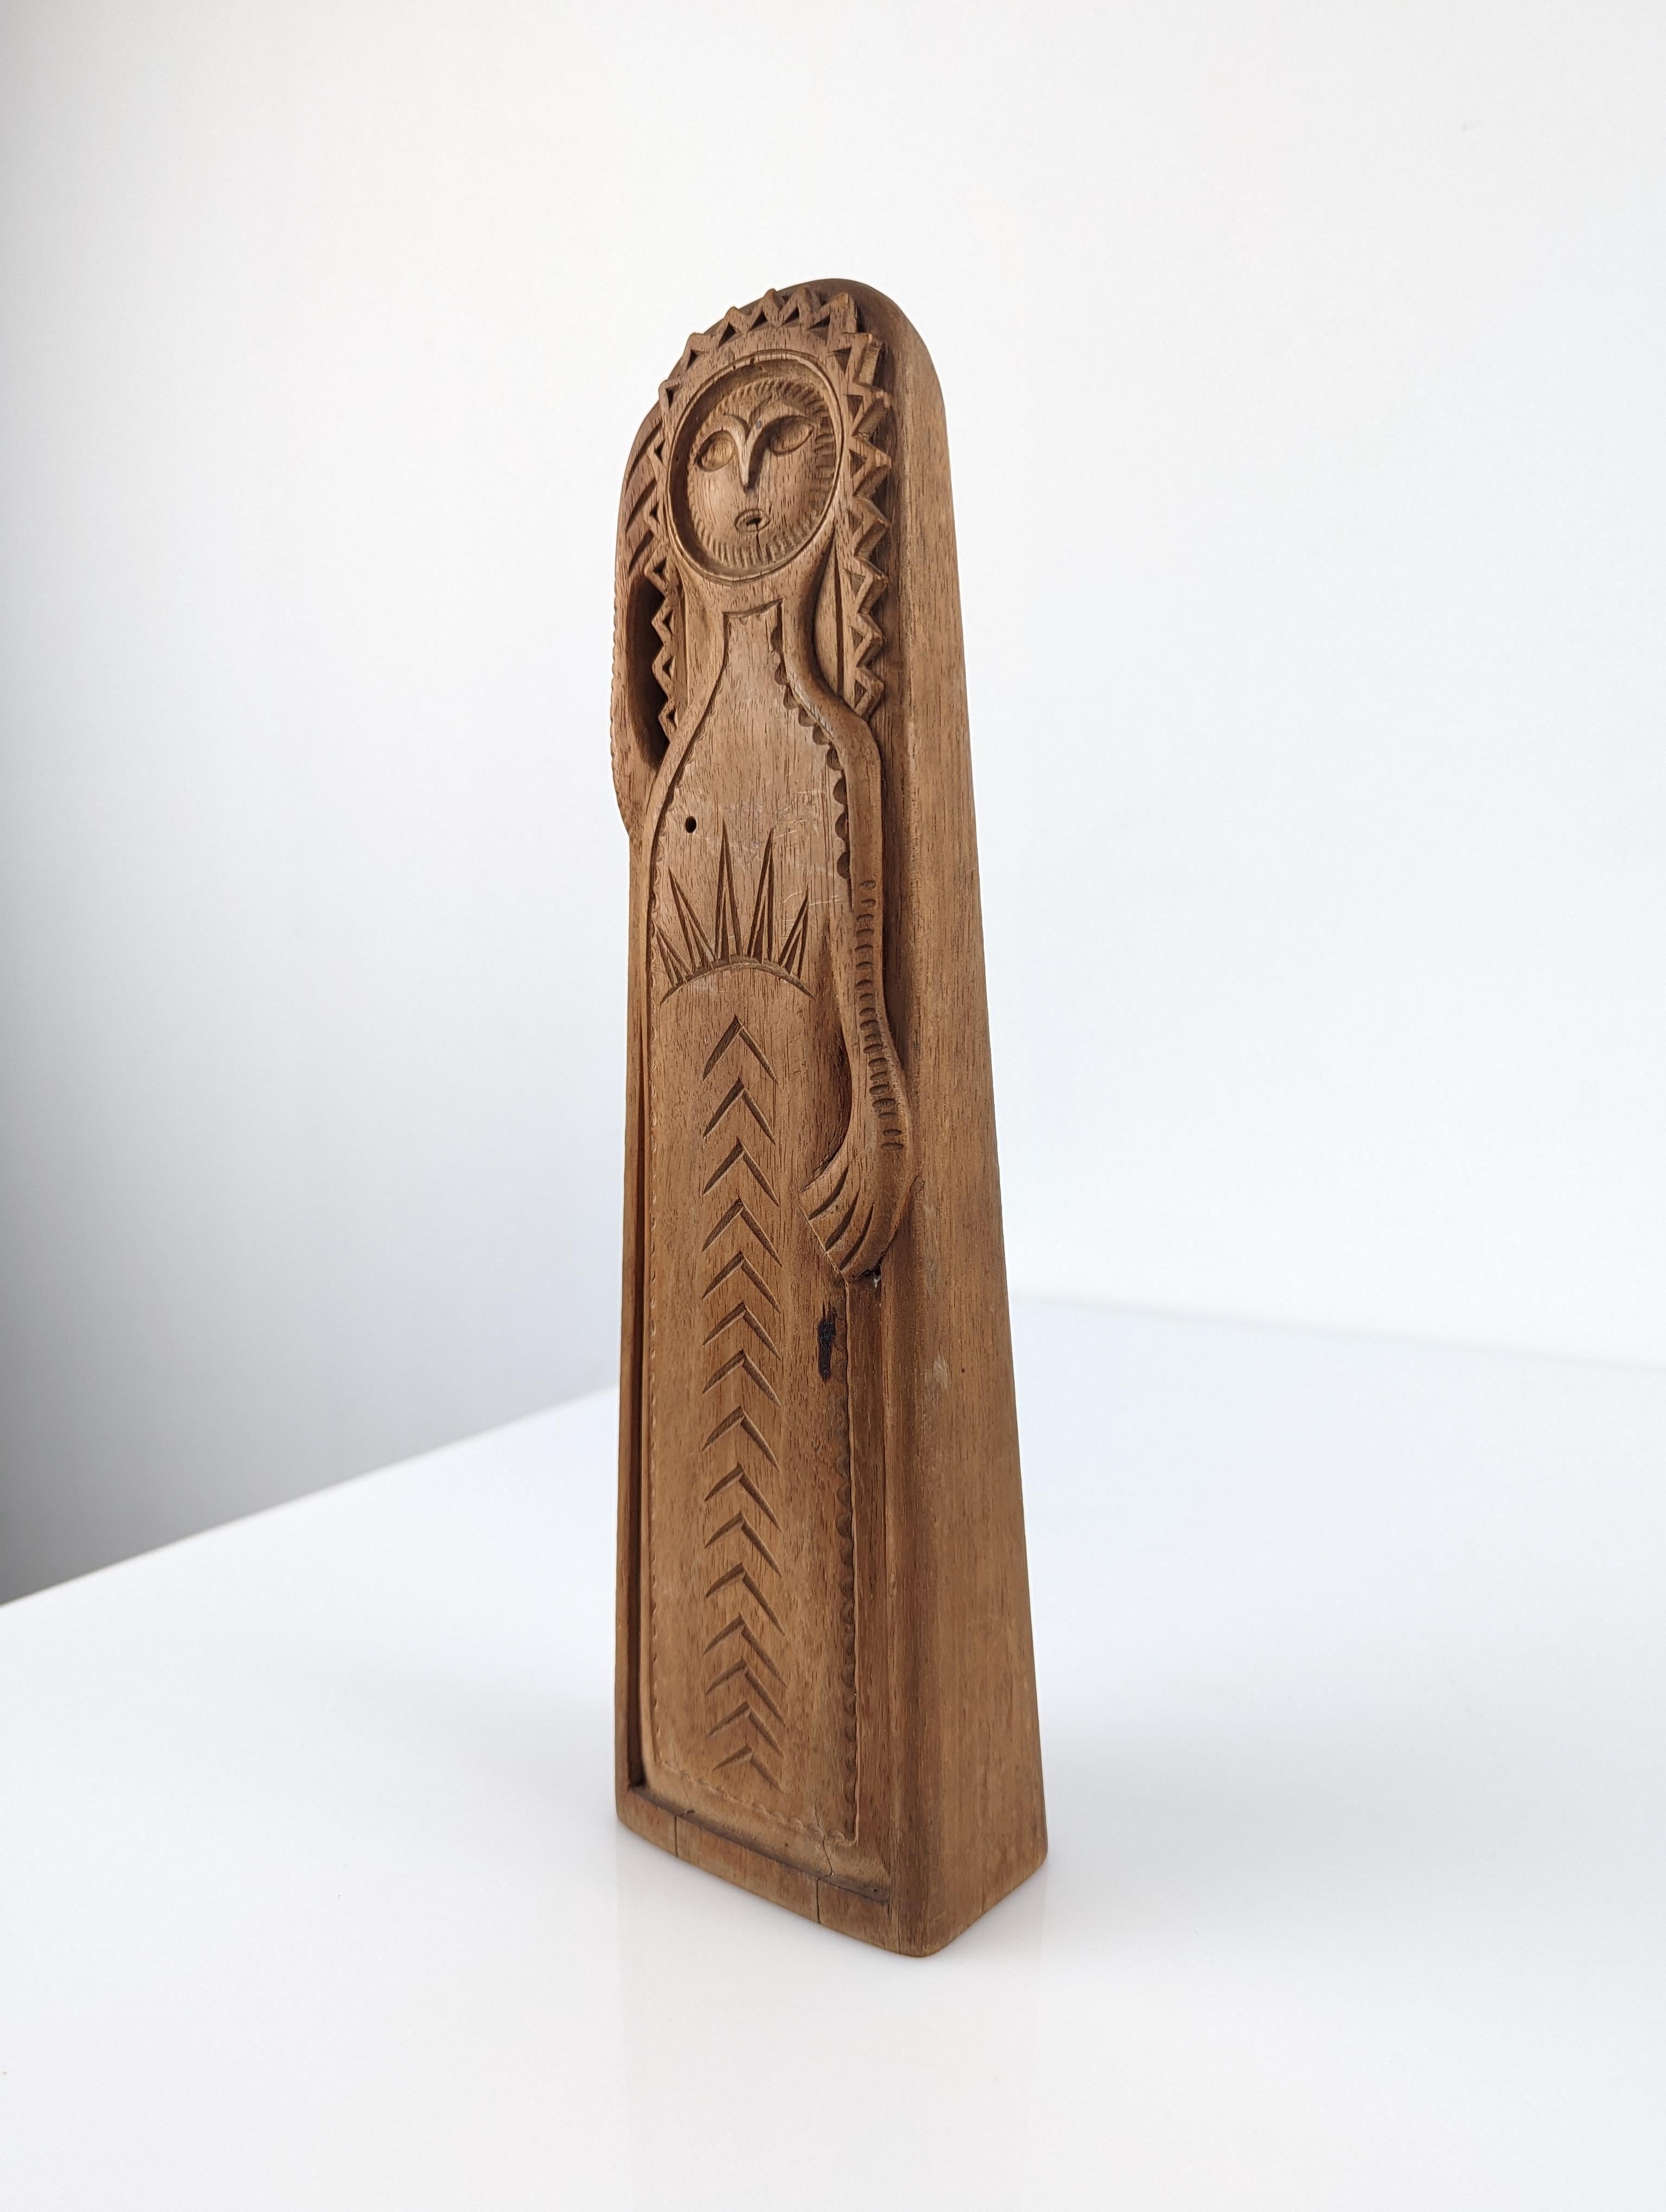 Very interesting sculpture of Danish origin carved in wood and signed on the base by the artist to be documented.